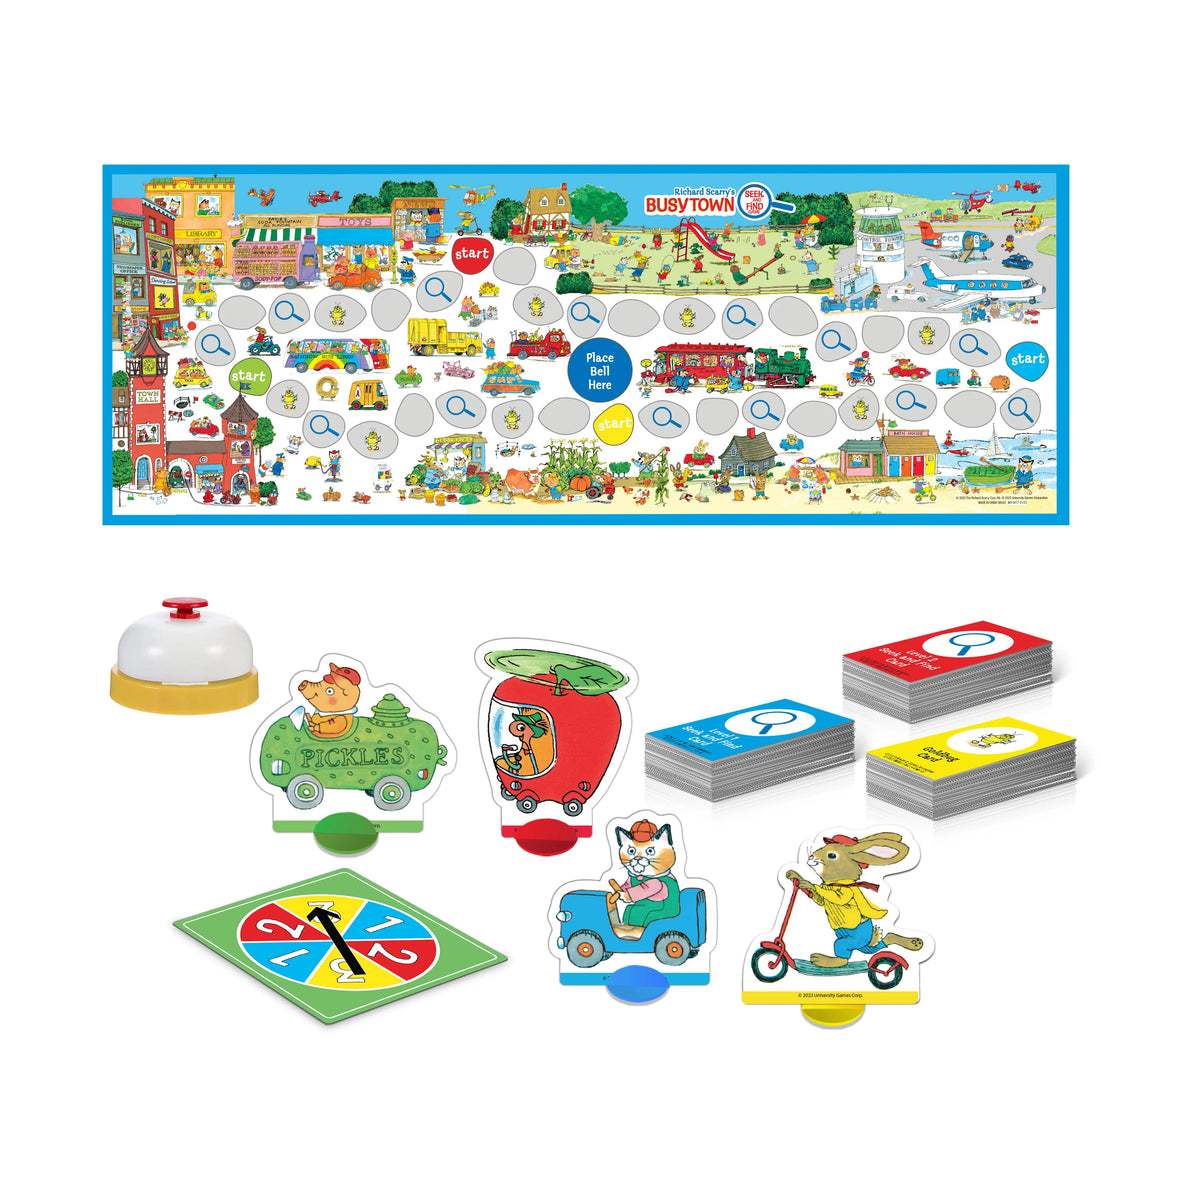 Richard Scarry's Busytown: Seek & Find Game Cover